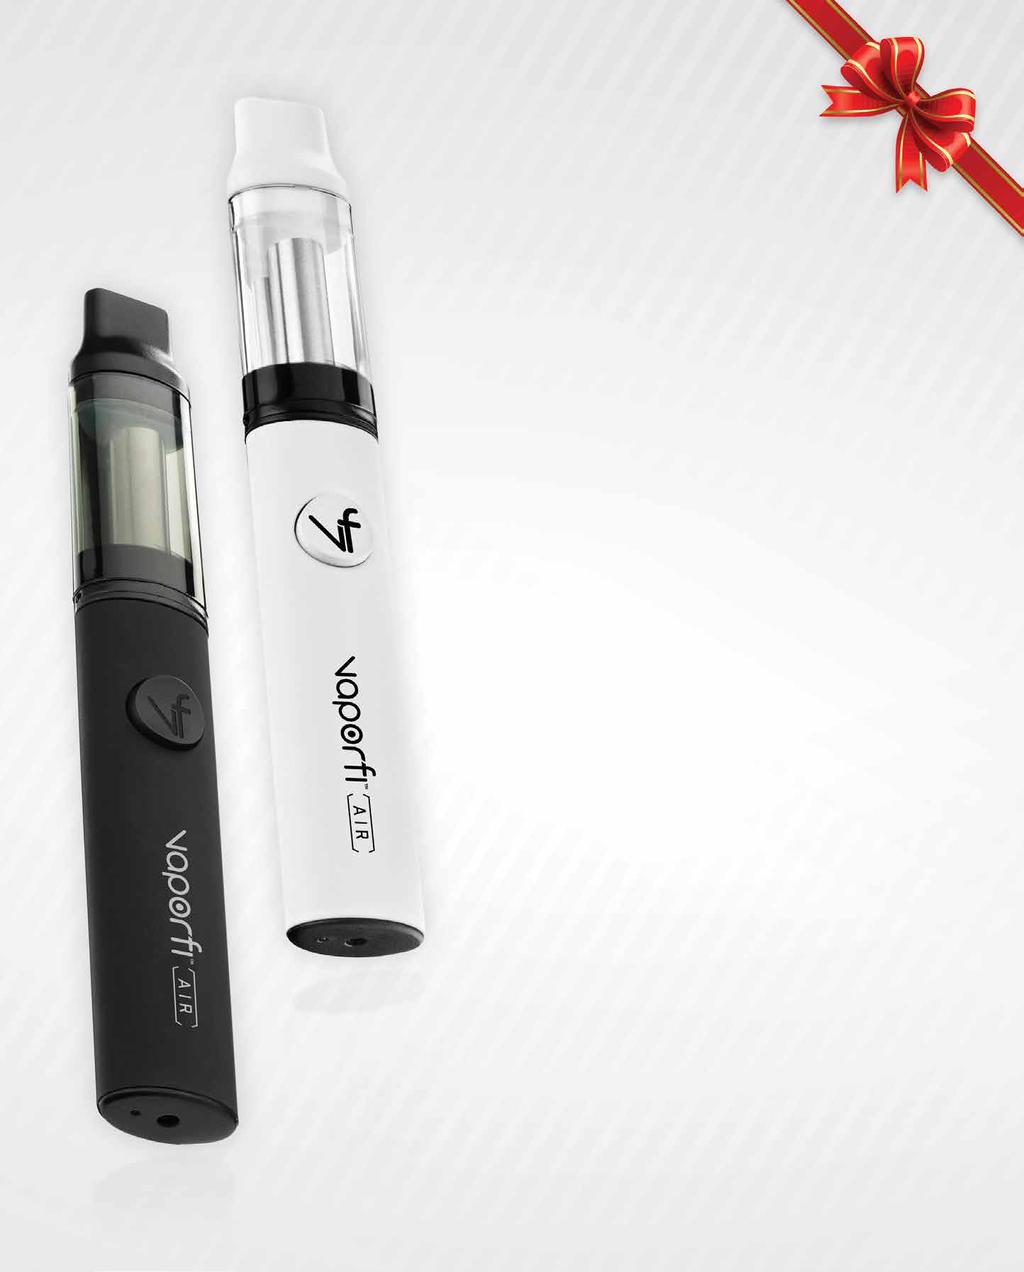 Air Starter Kit THE NOVICE VAPER This for the seasoned beginner who wants to give advanced vaporizer models a go, or someone who needs a basic vaporizer for their collection.